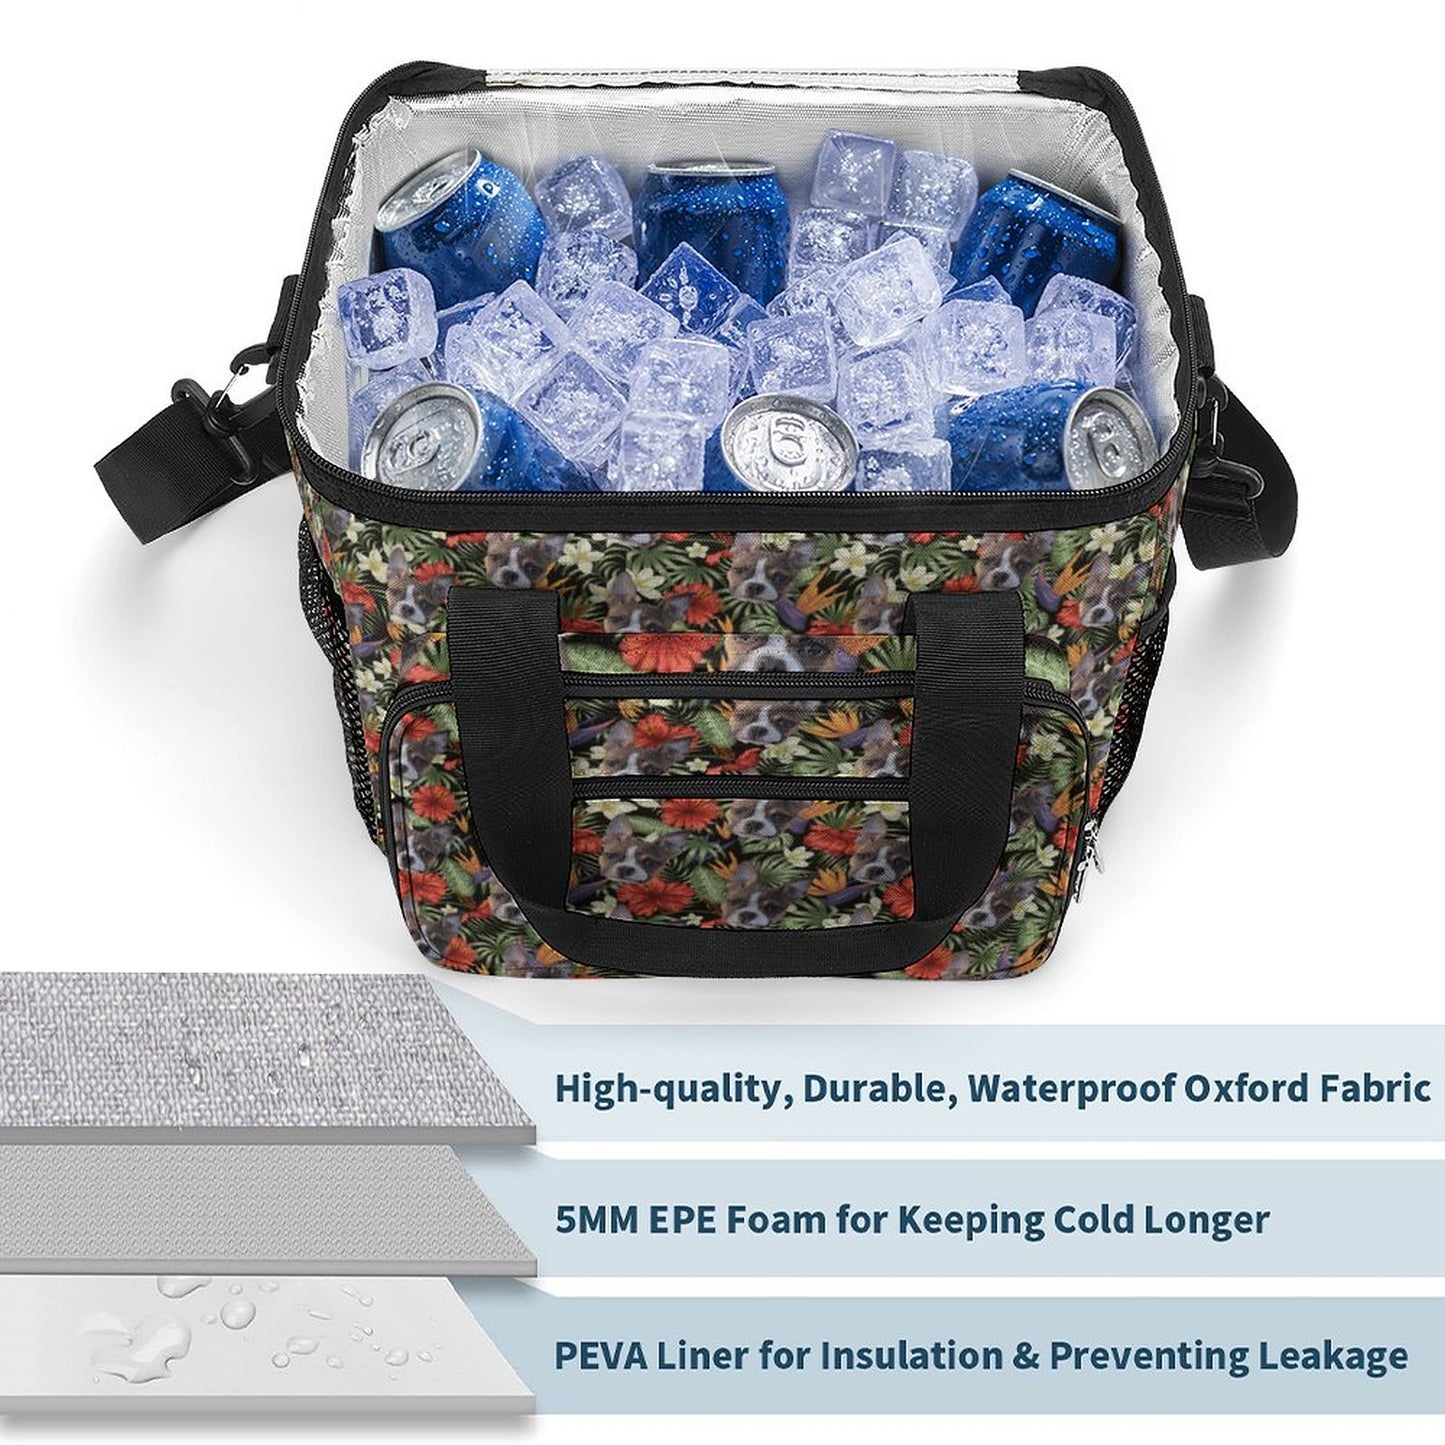 HAWAIIAN STYLE FACE - 30 Can Collapsible Insulated Cooler